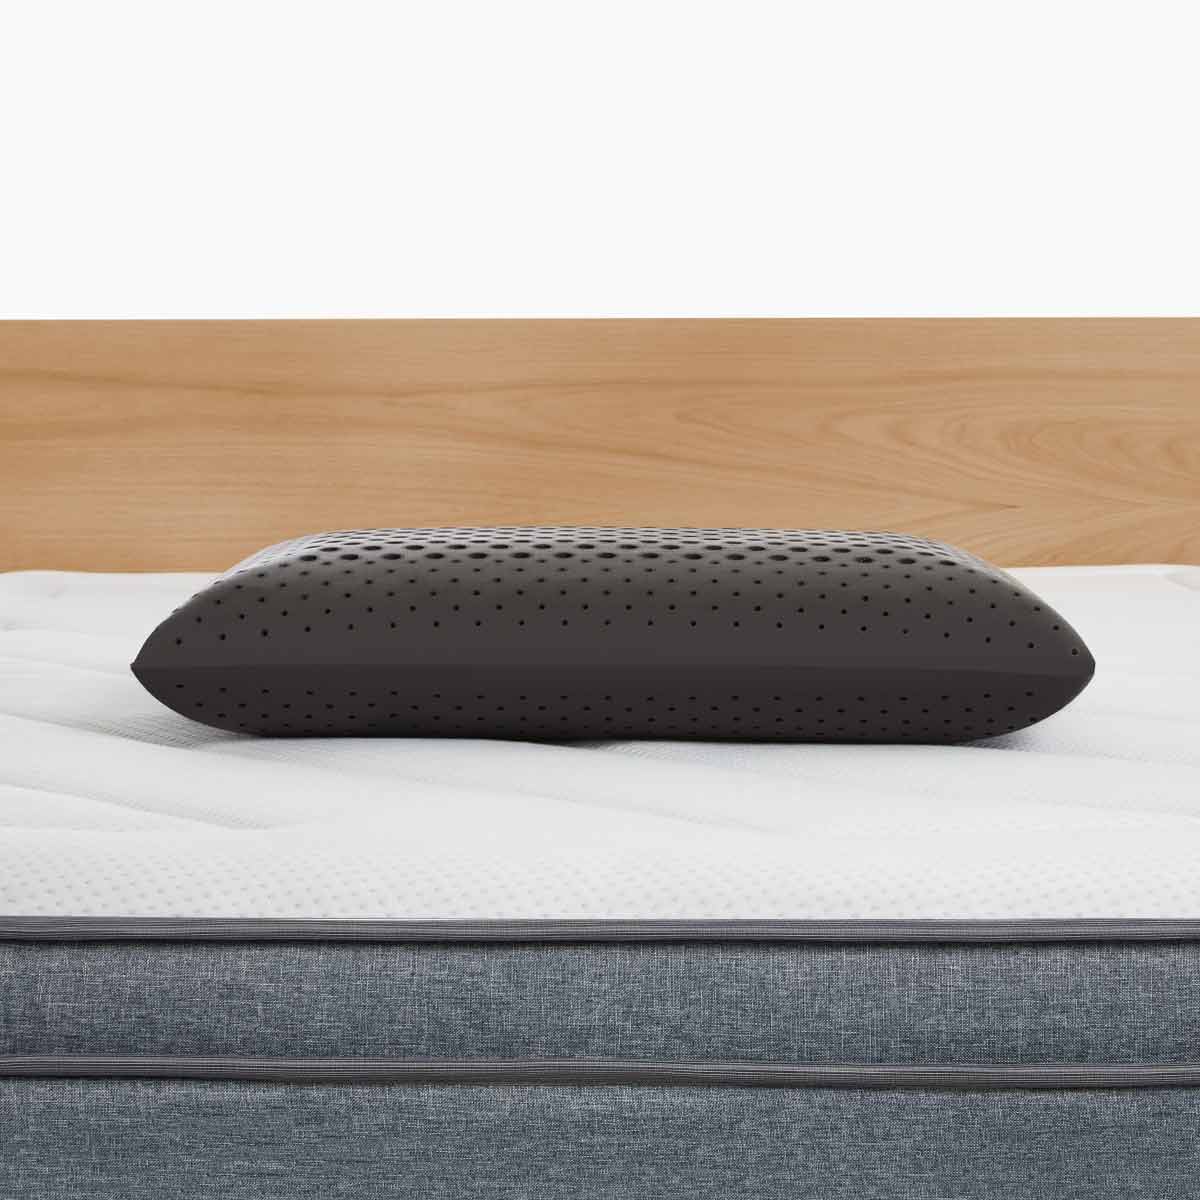 Eva Pillow in Charcoal without Cover on the Eva Mattress